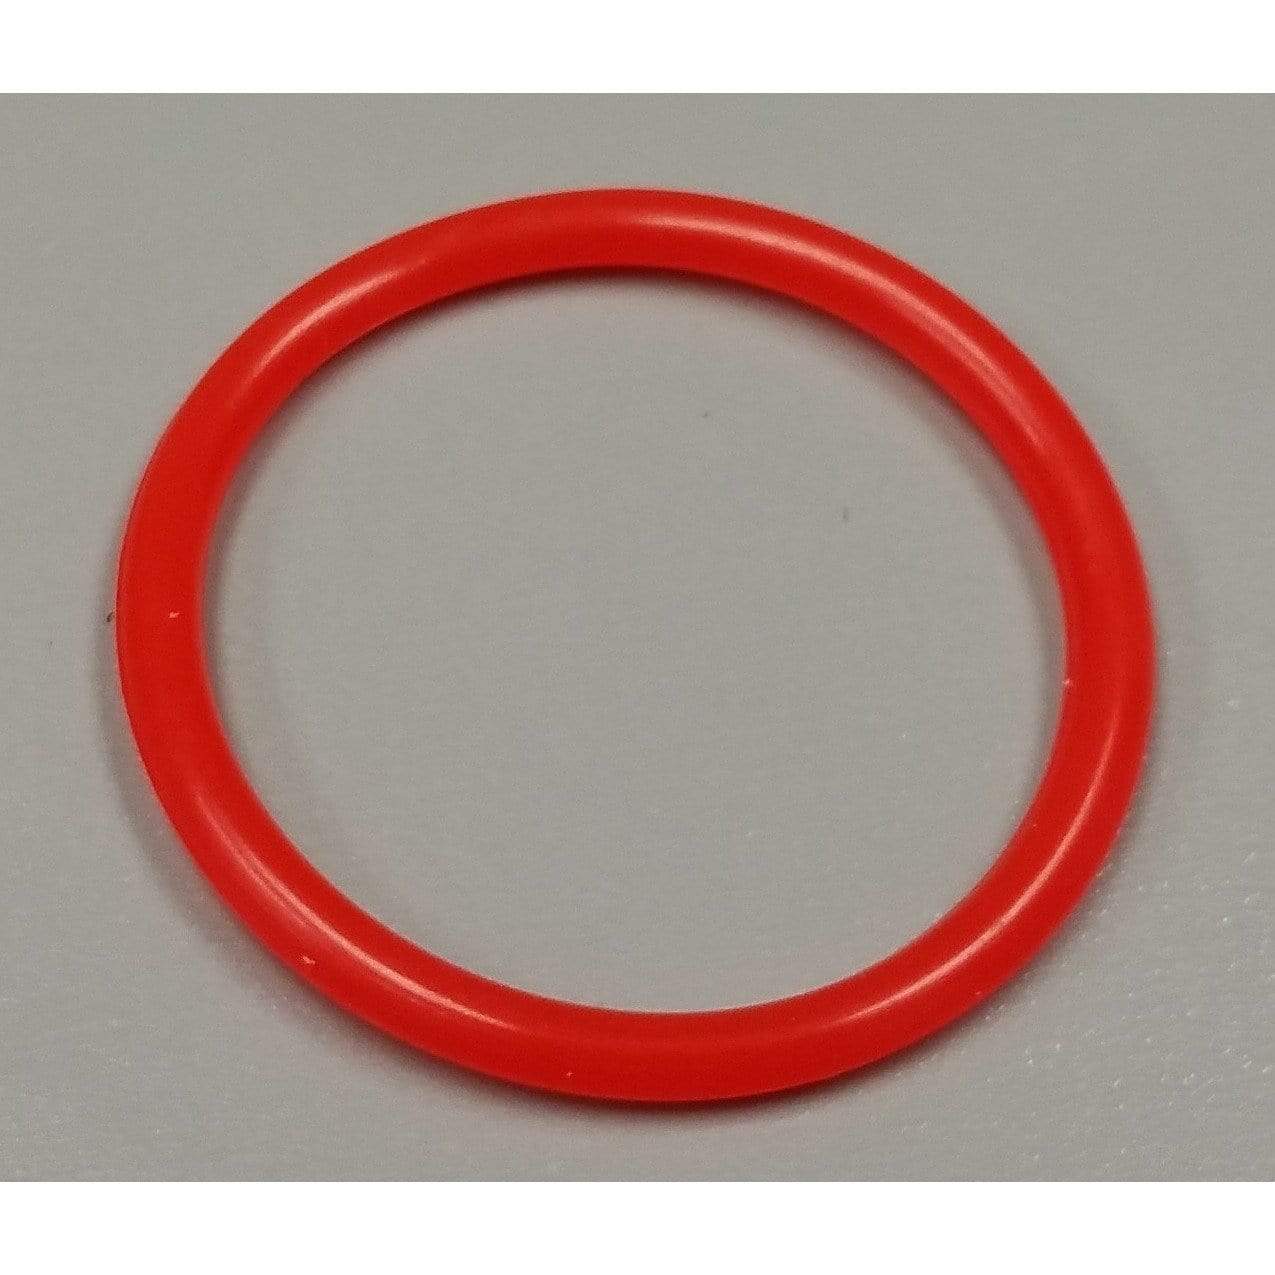 TFV4 Micro Replacement Seals Top Red Glass Oring Seals/Oring's